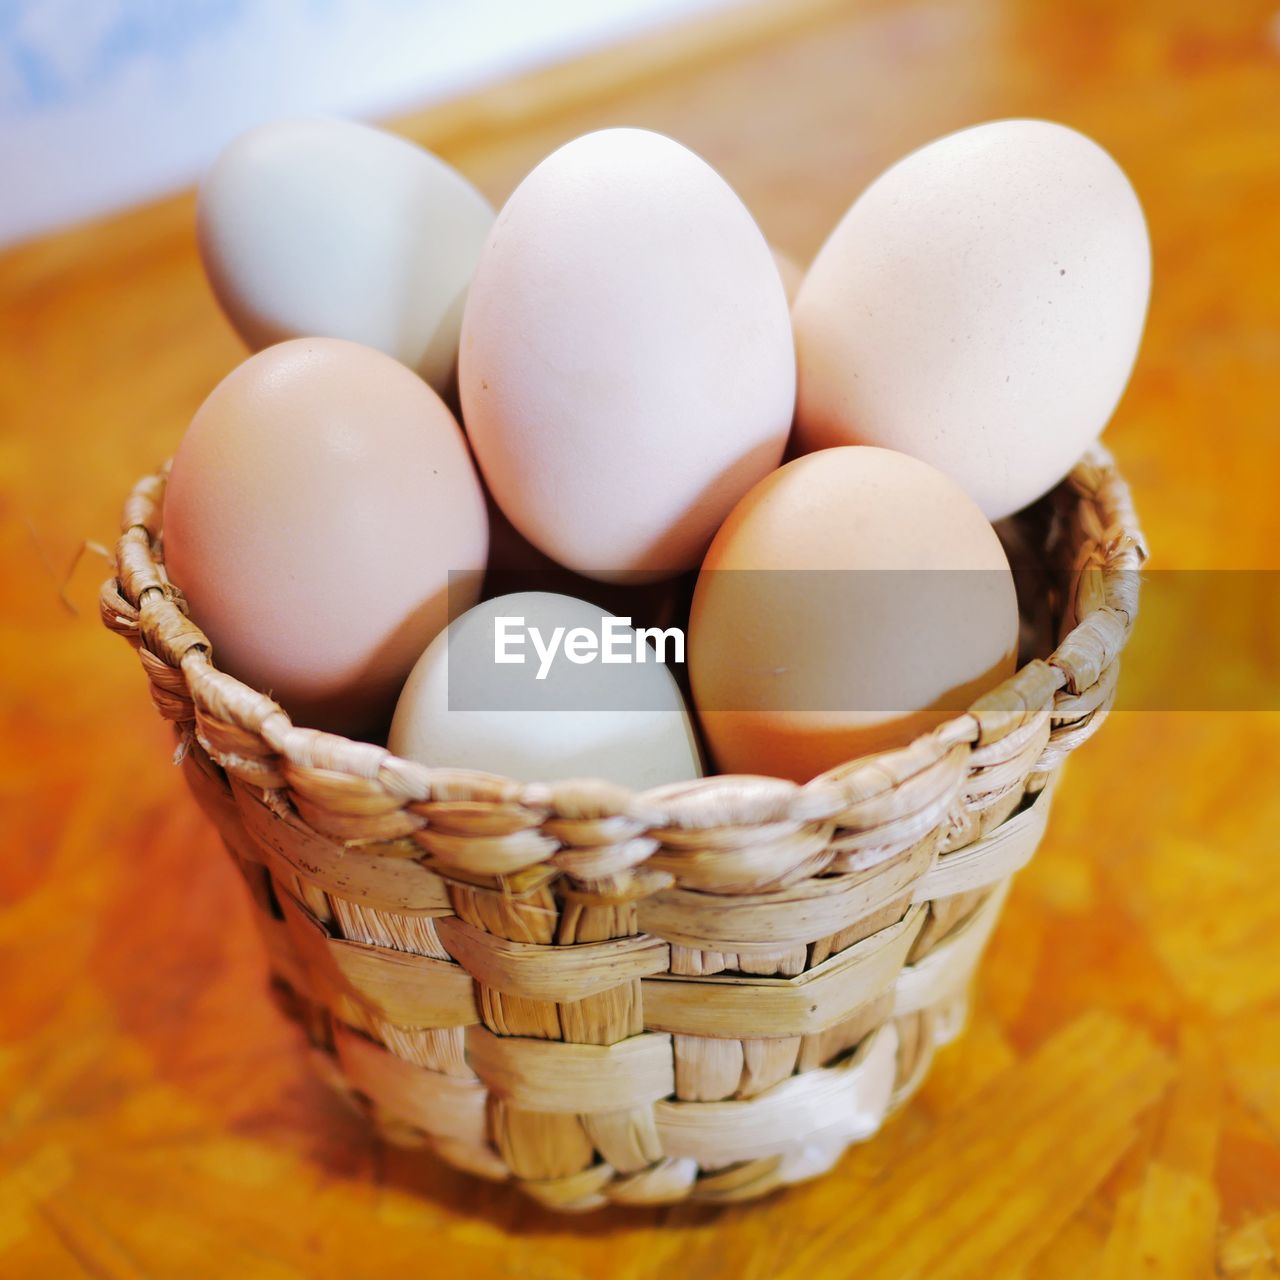 CLOSE-UP OF EGGS IN BASKET ON TABLE